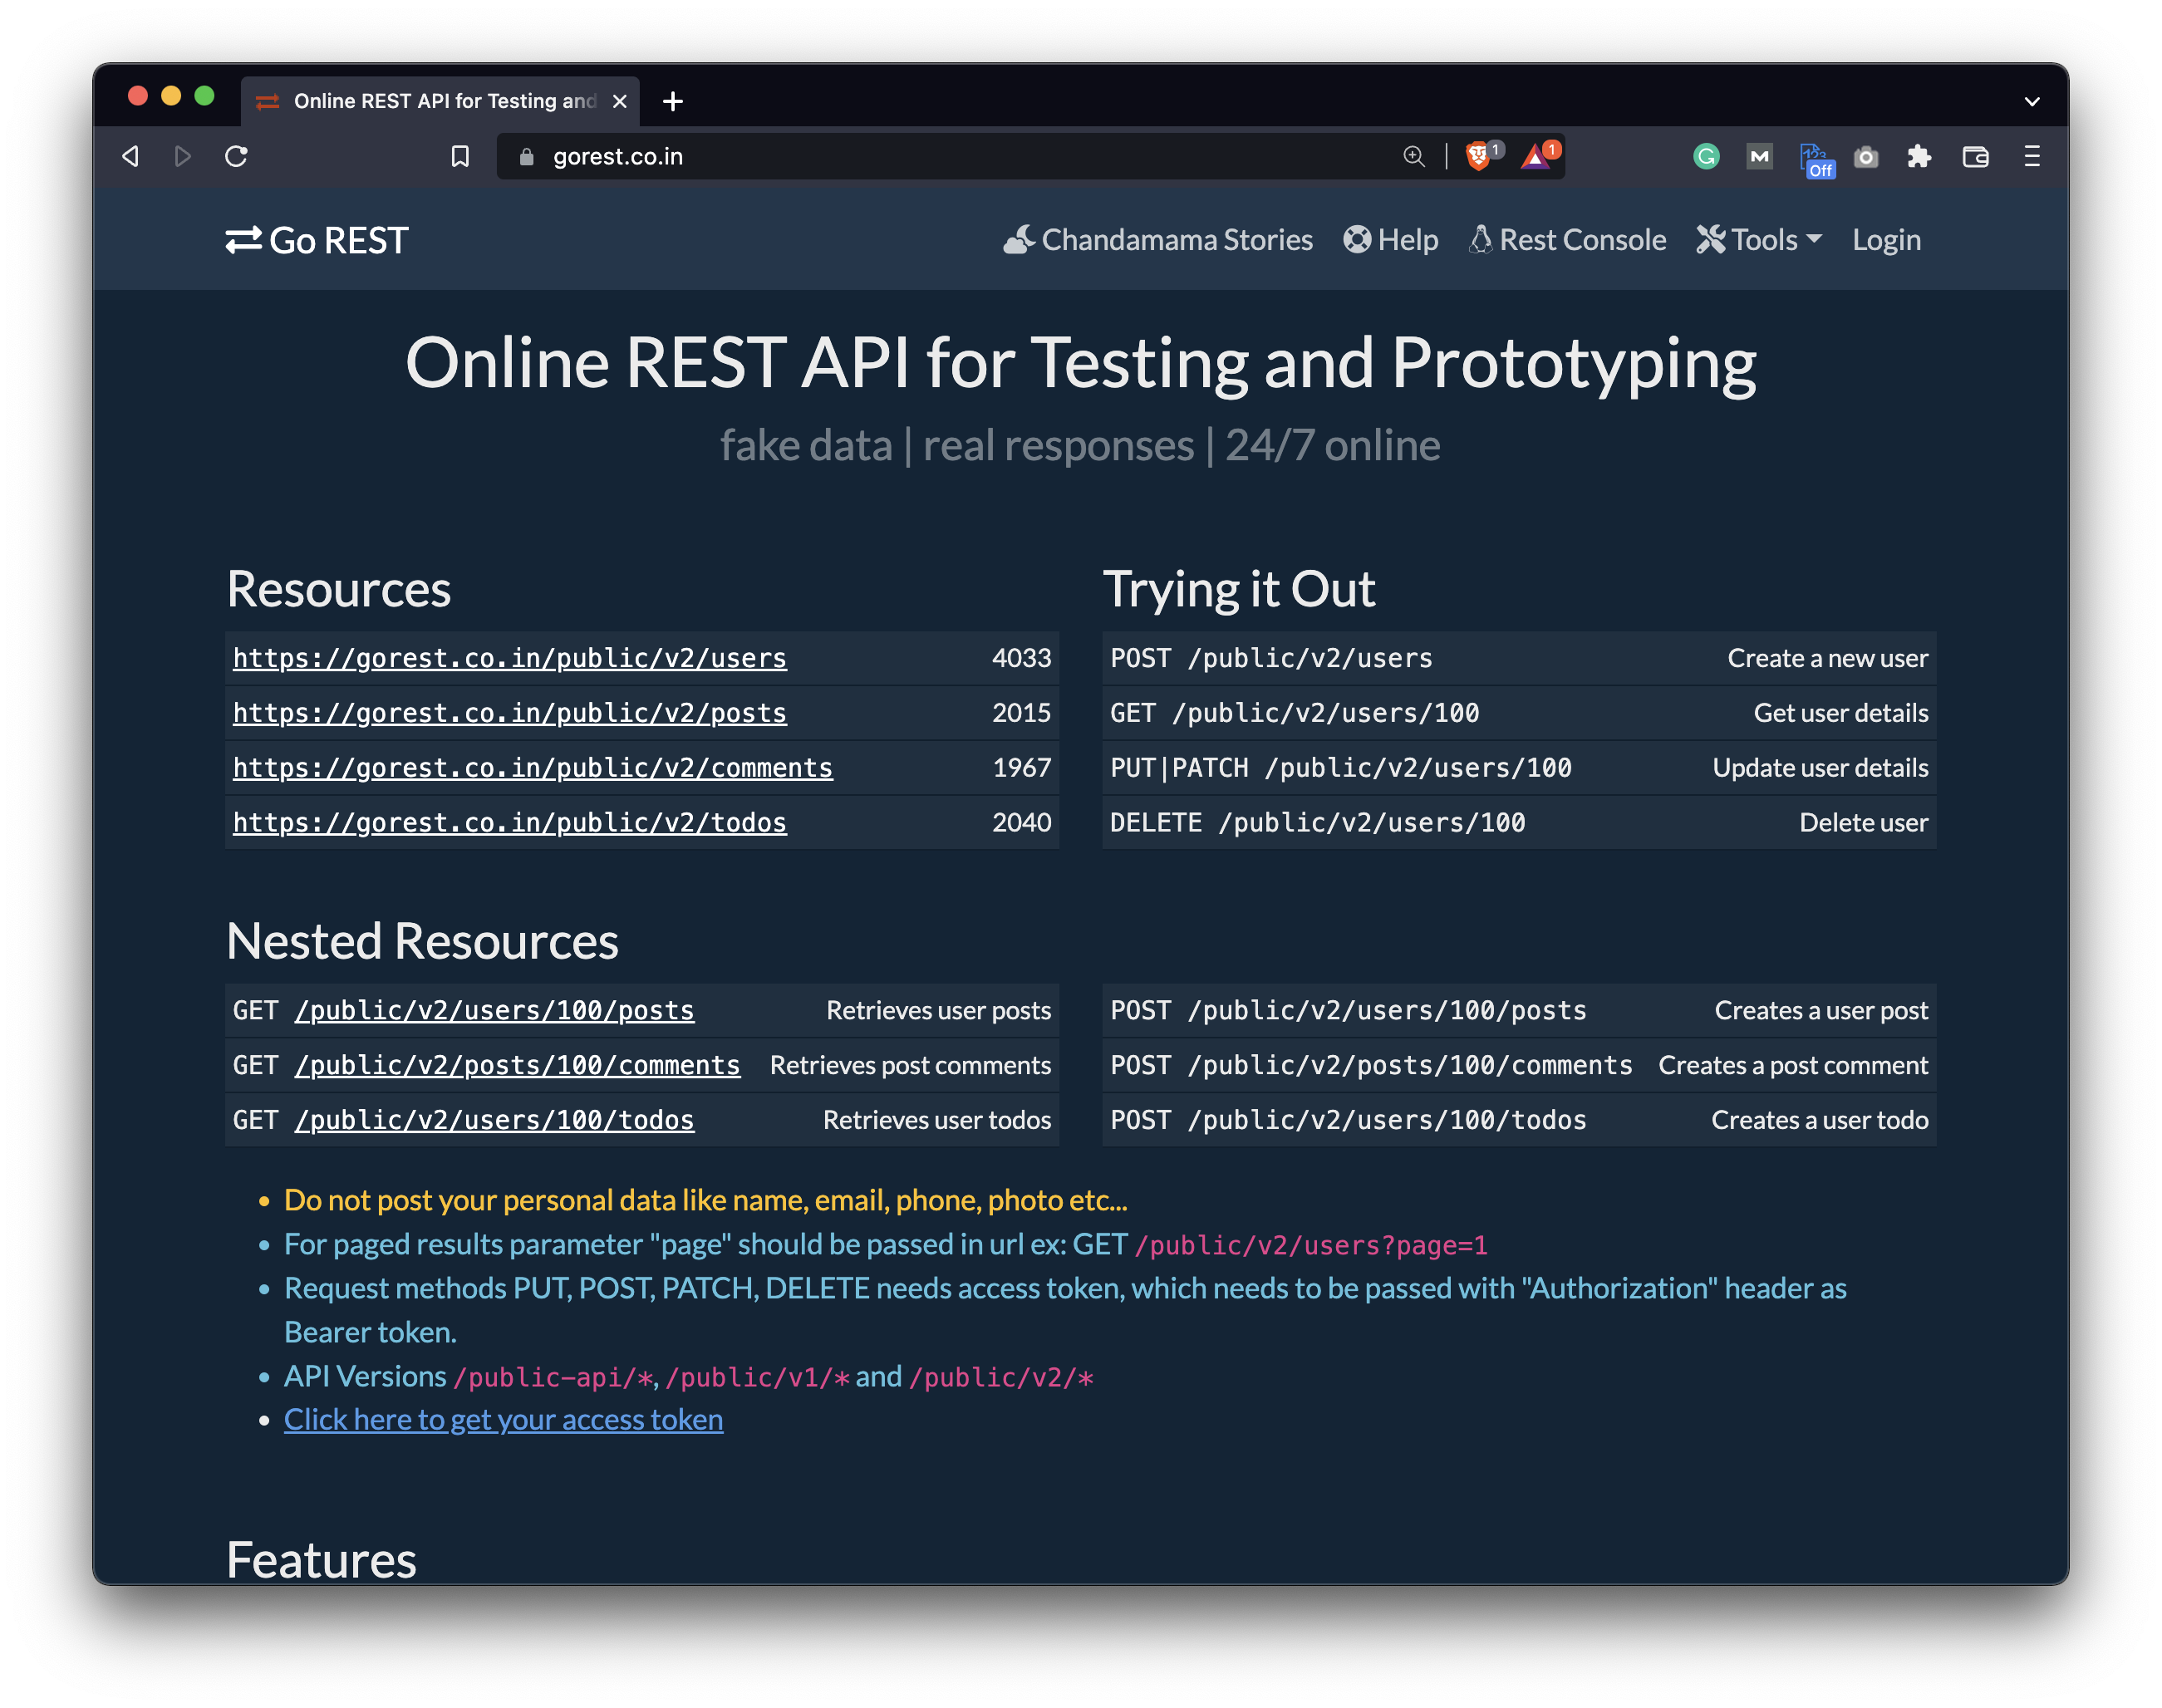 Image 1 - GoRest REST API homepage (image by author)